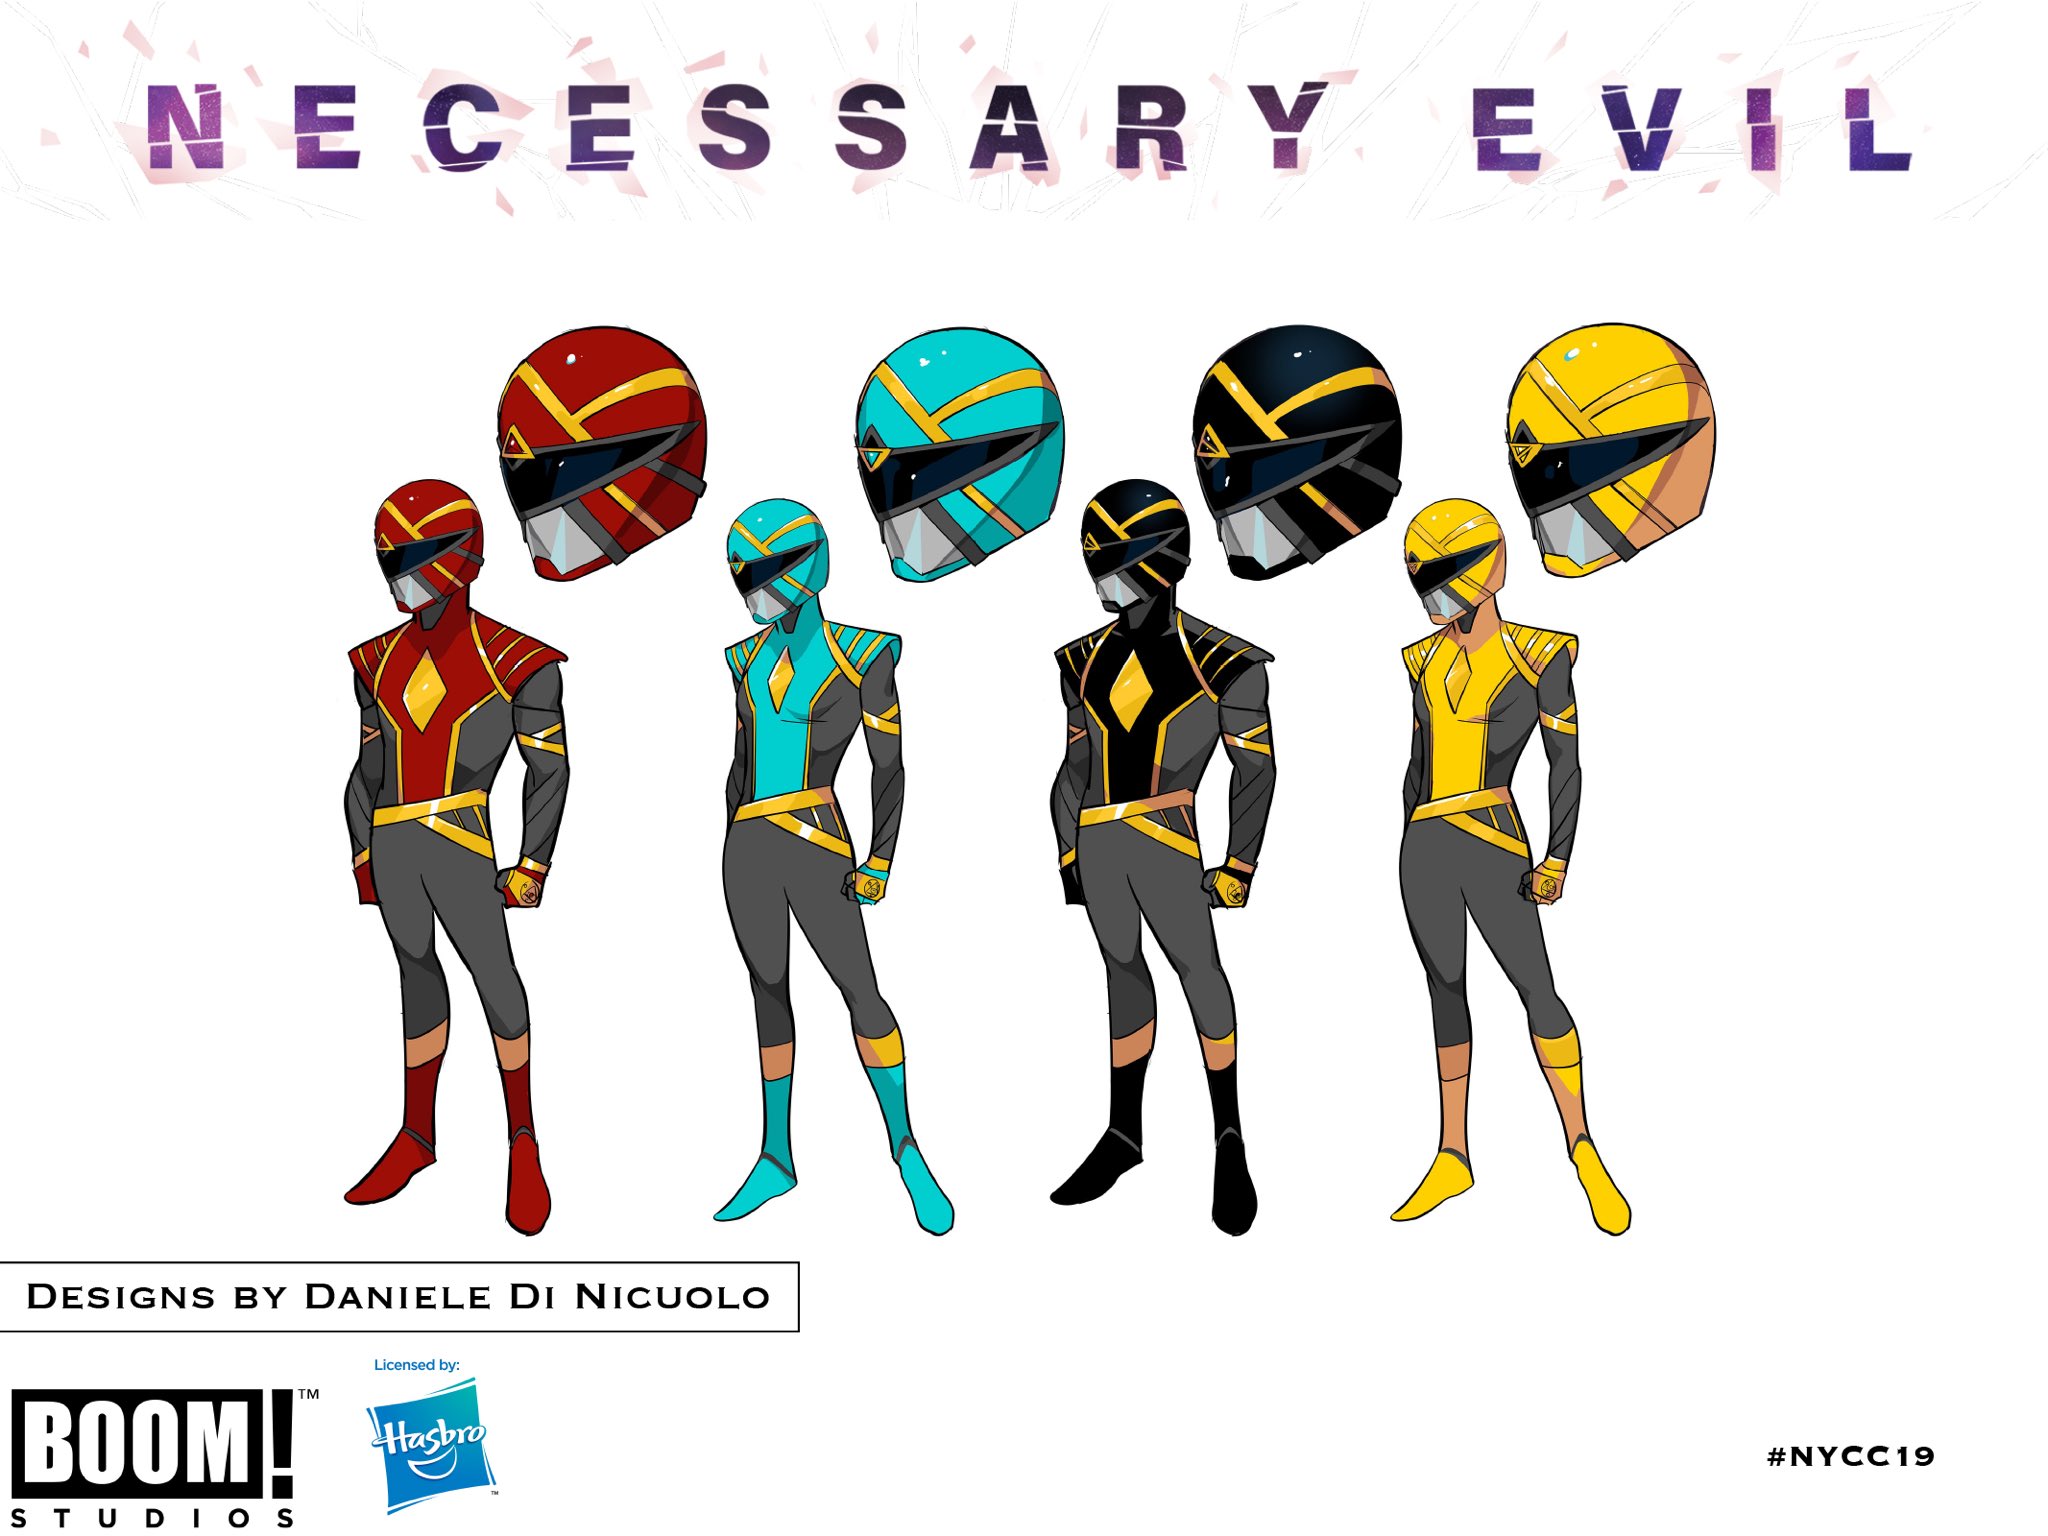 BOOM! Studios Omega Rangers designs are based on alchemical symbols according to &